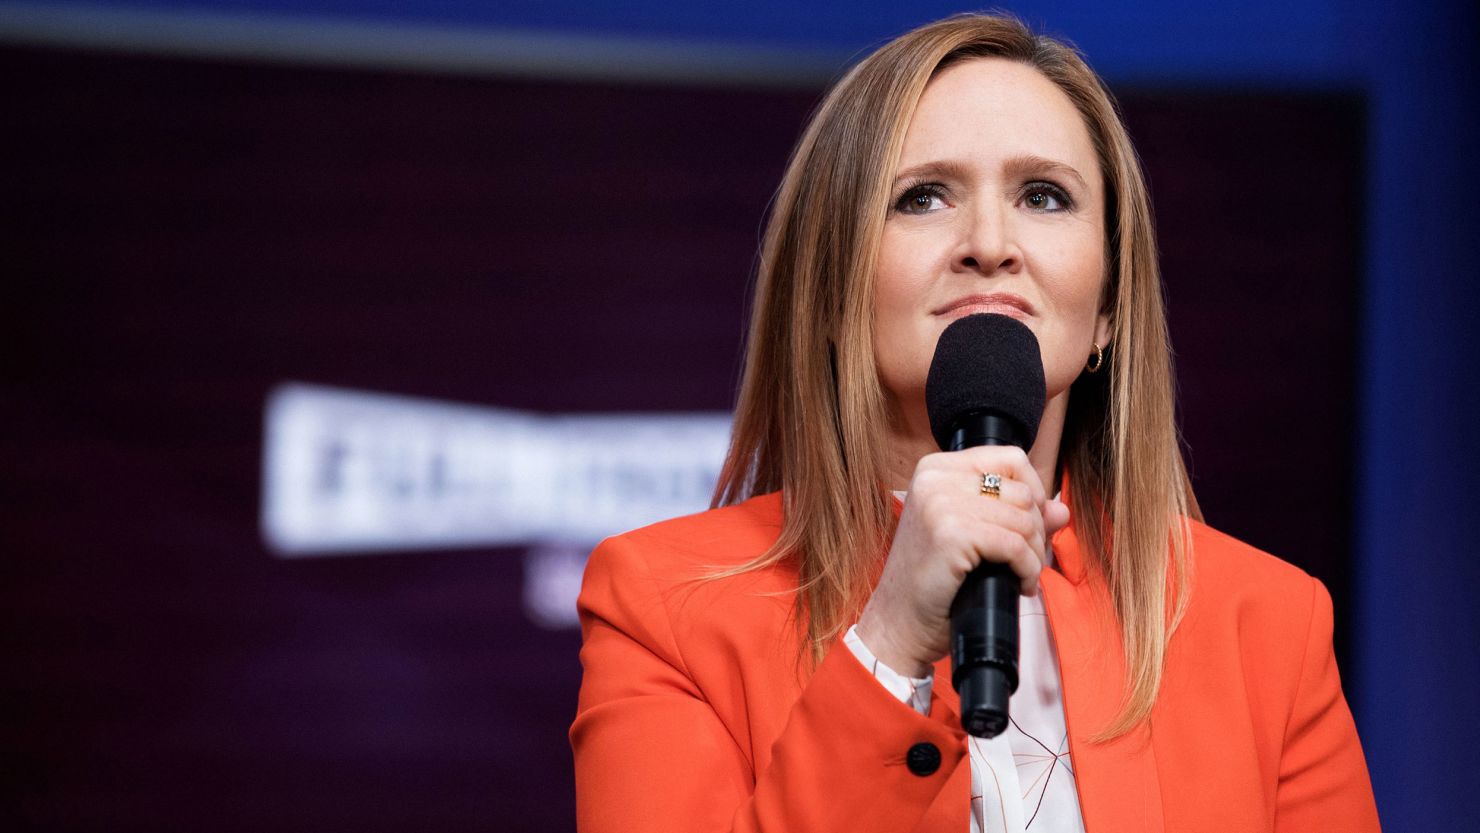 Samantha Bee's "Full Frontal with Samantha Bee" will end after this season.